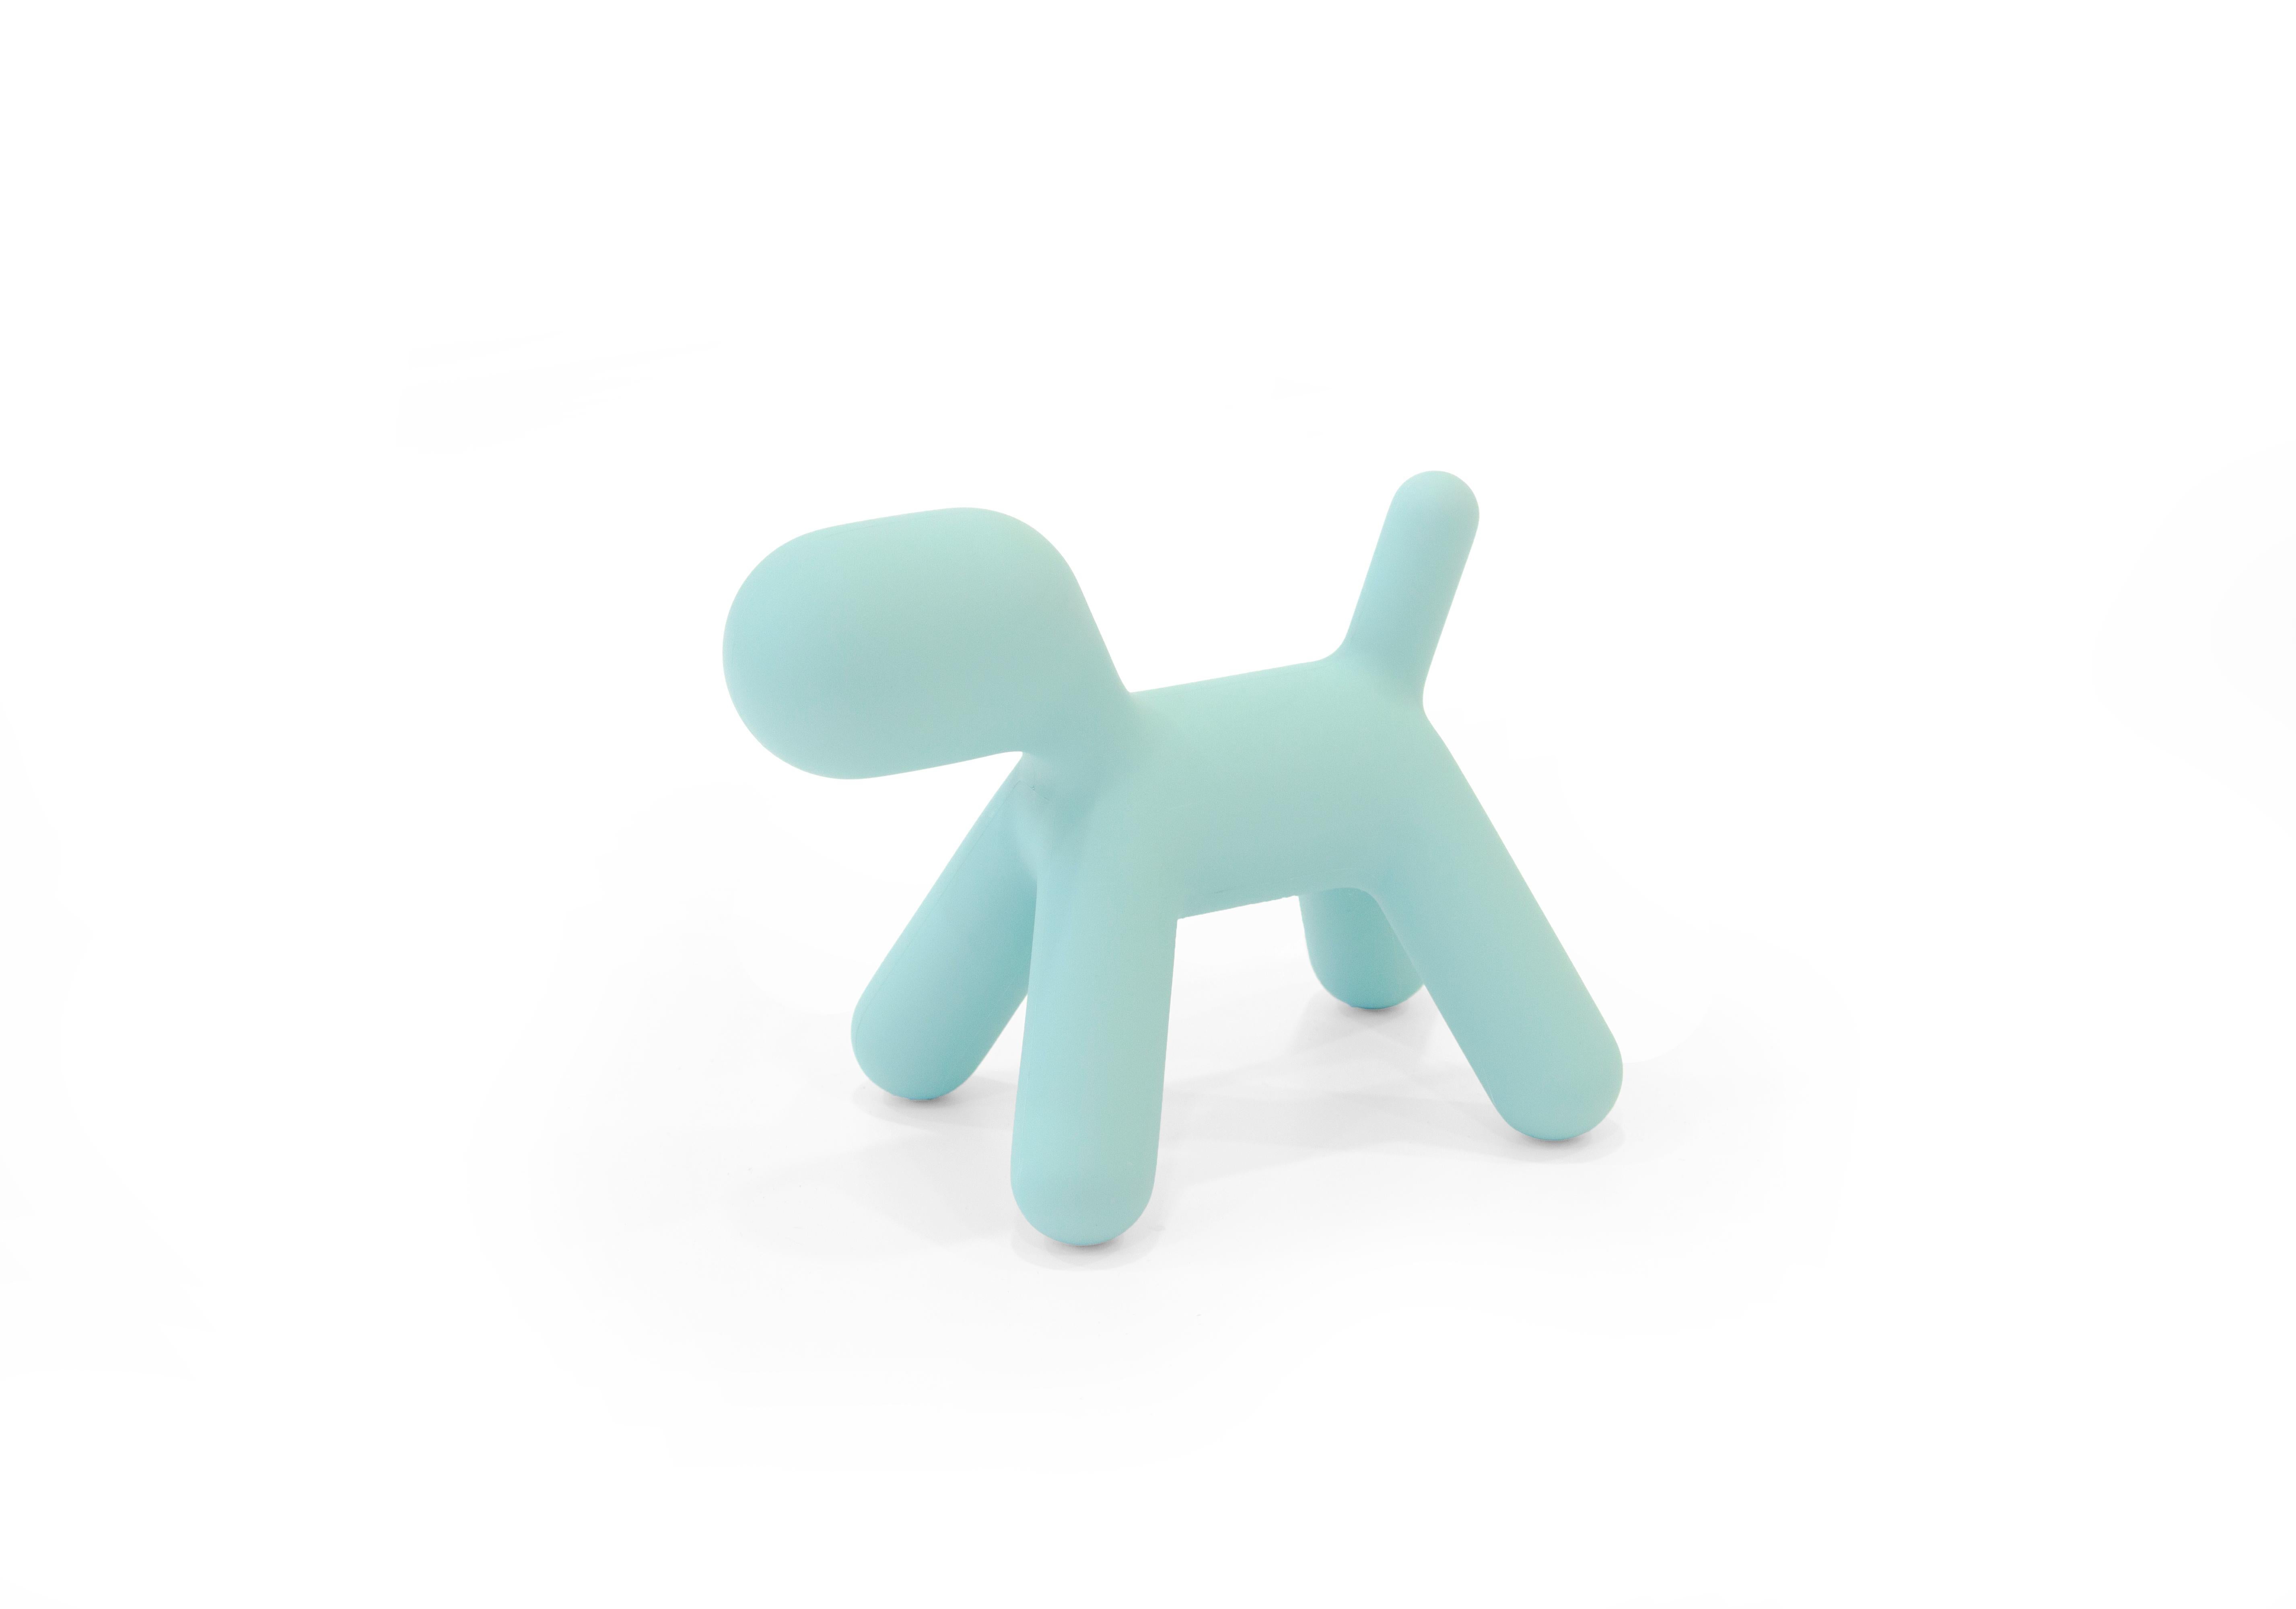 Plastic Puppy L in White by Eero Aarnio for Magis For Sale